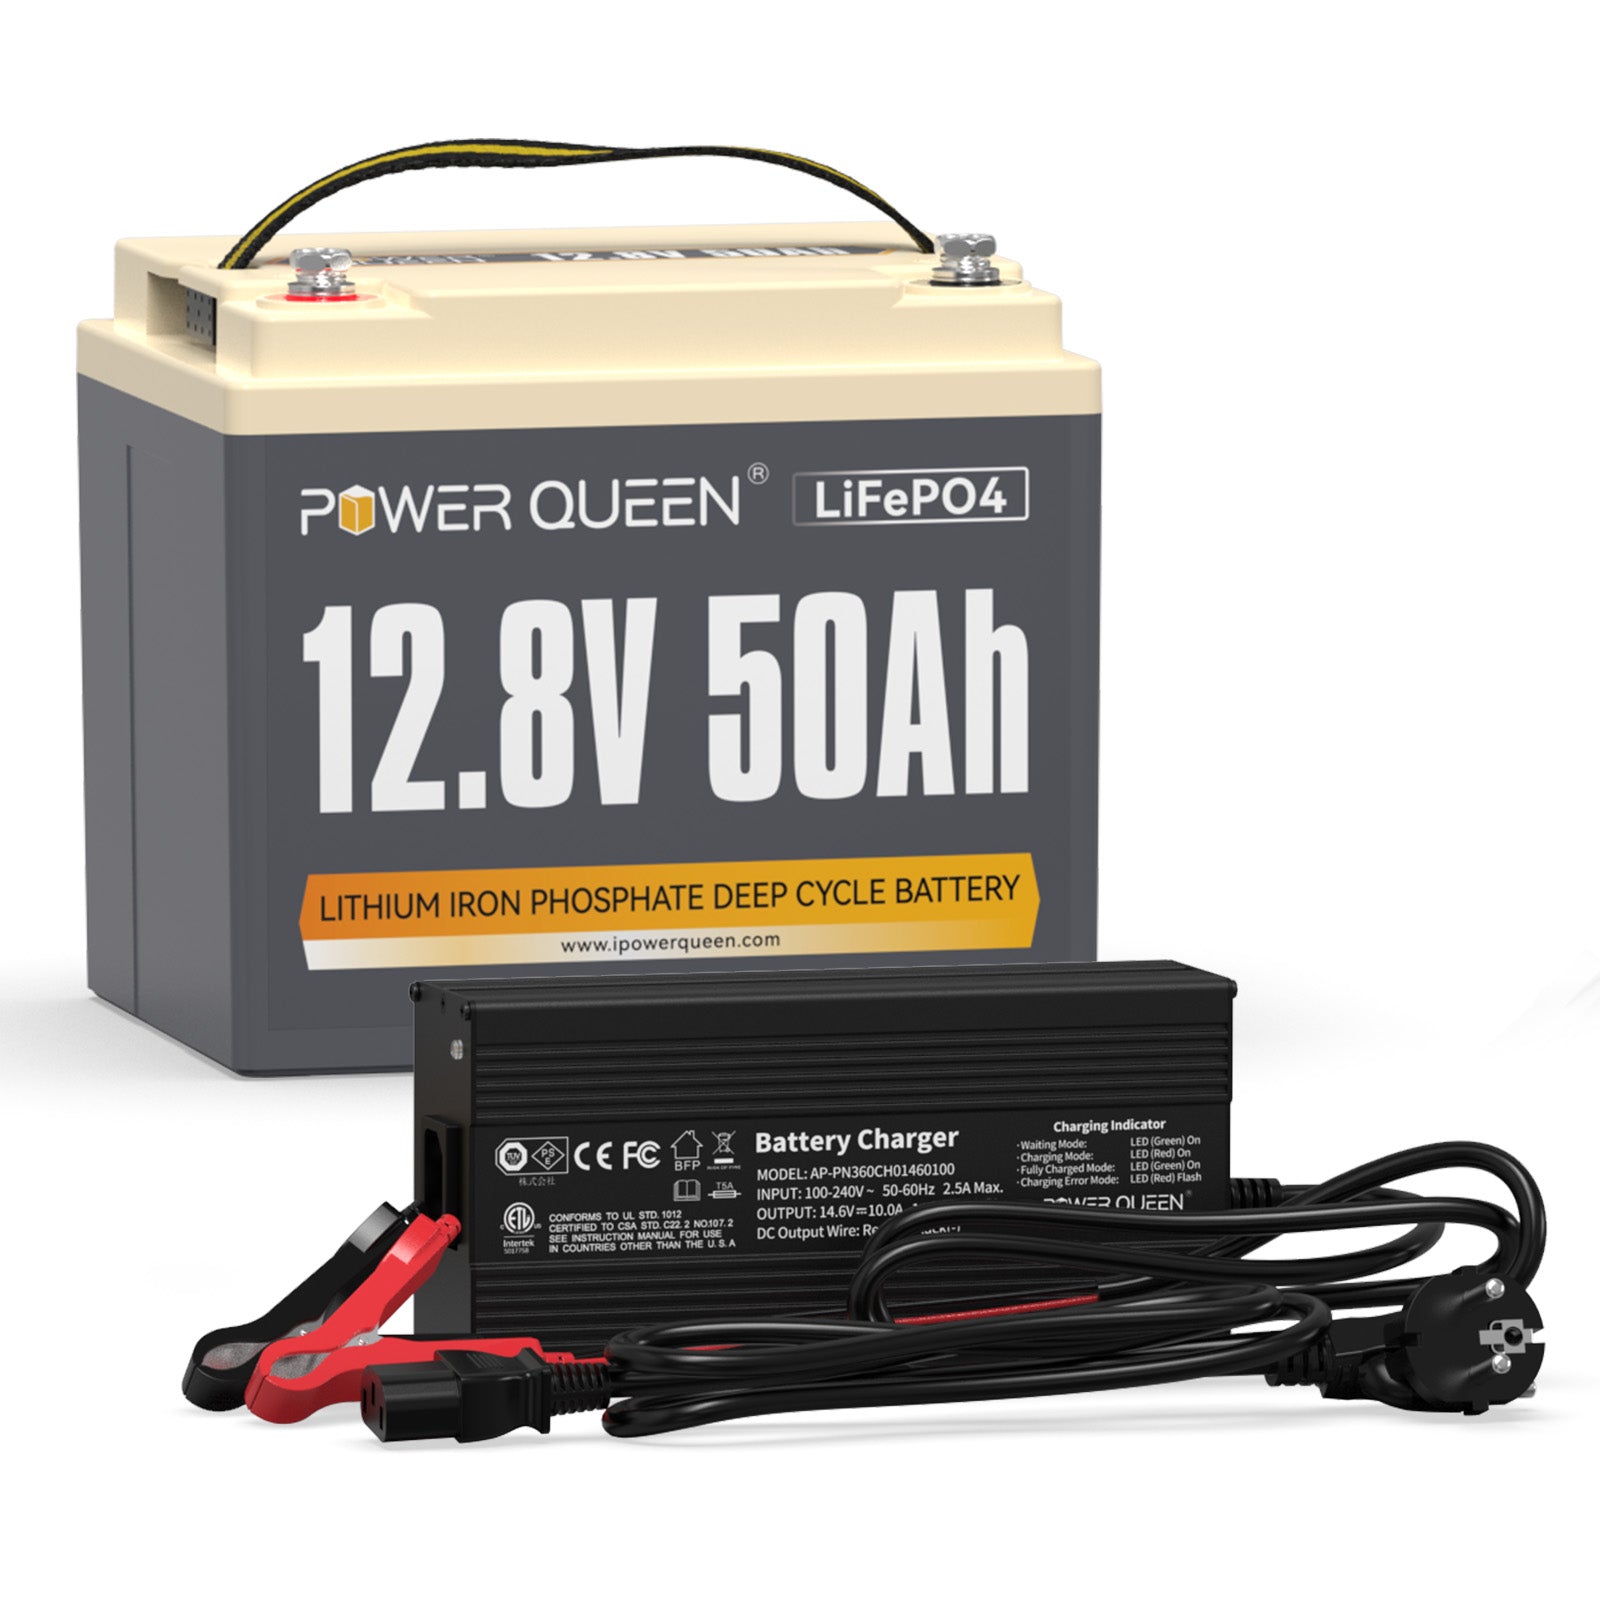 Power Queen 12.8V 50Ah LiFePO4 battery with 14.6V 10A LiFePO4 charger